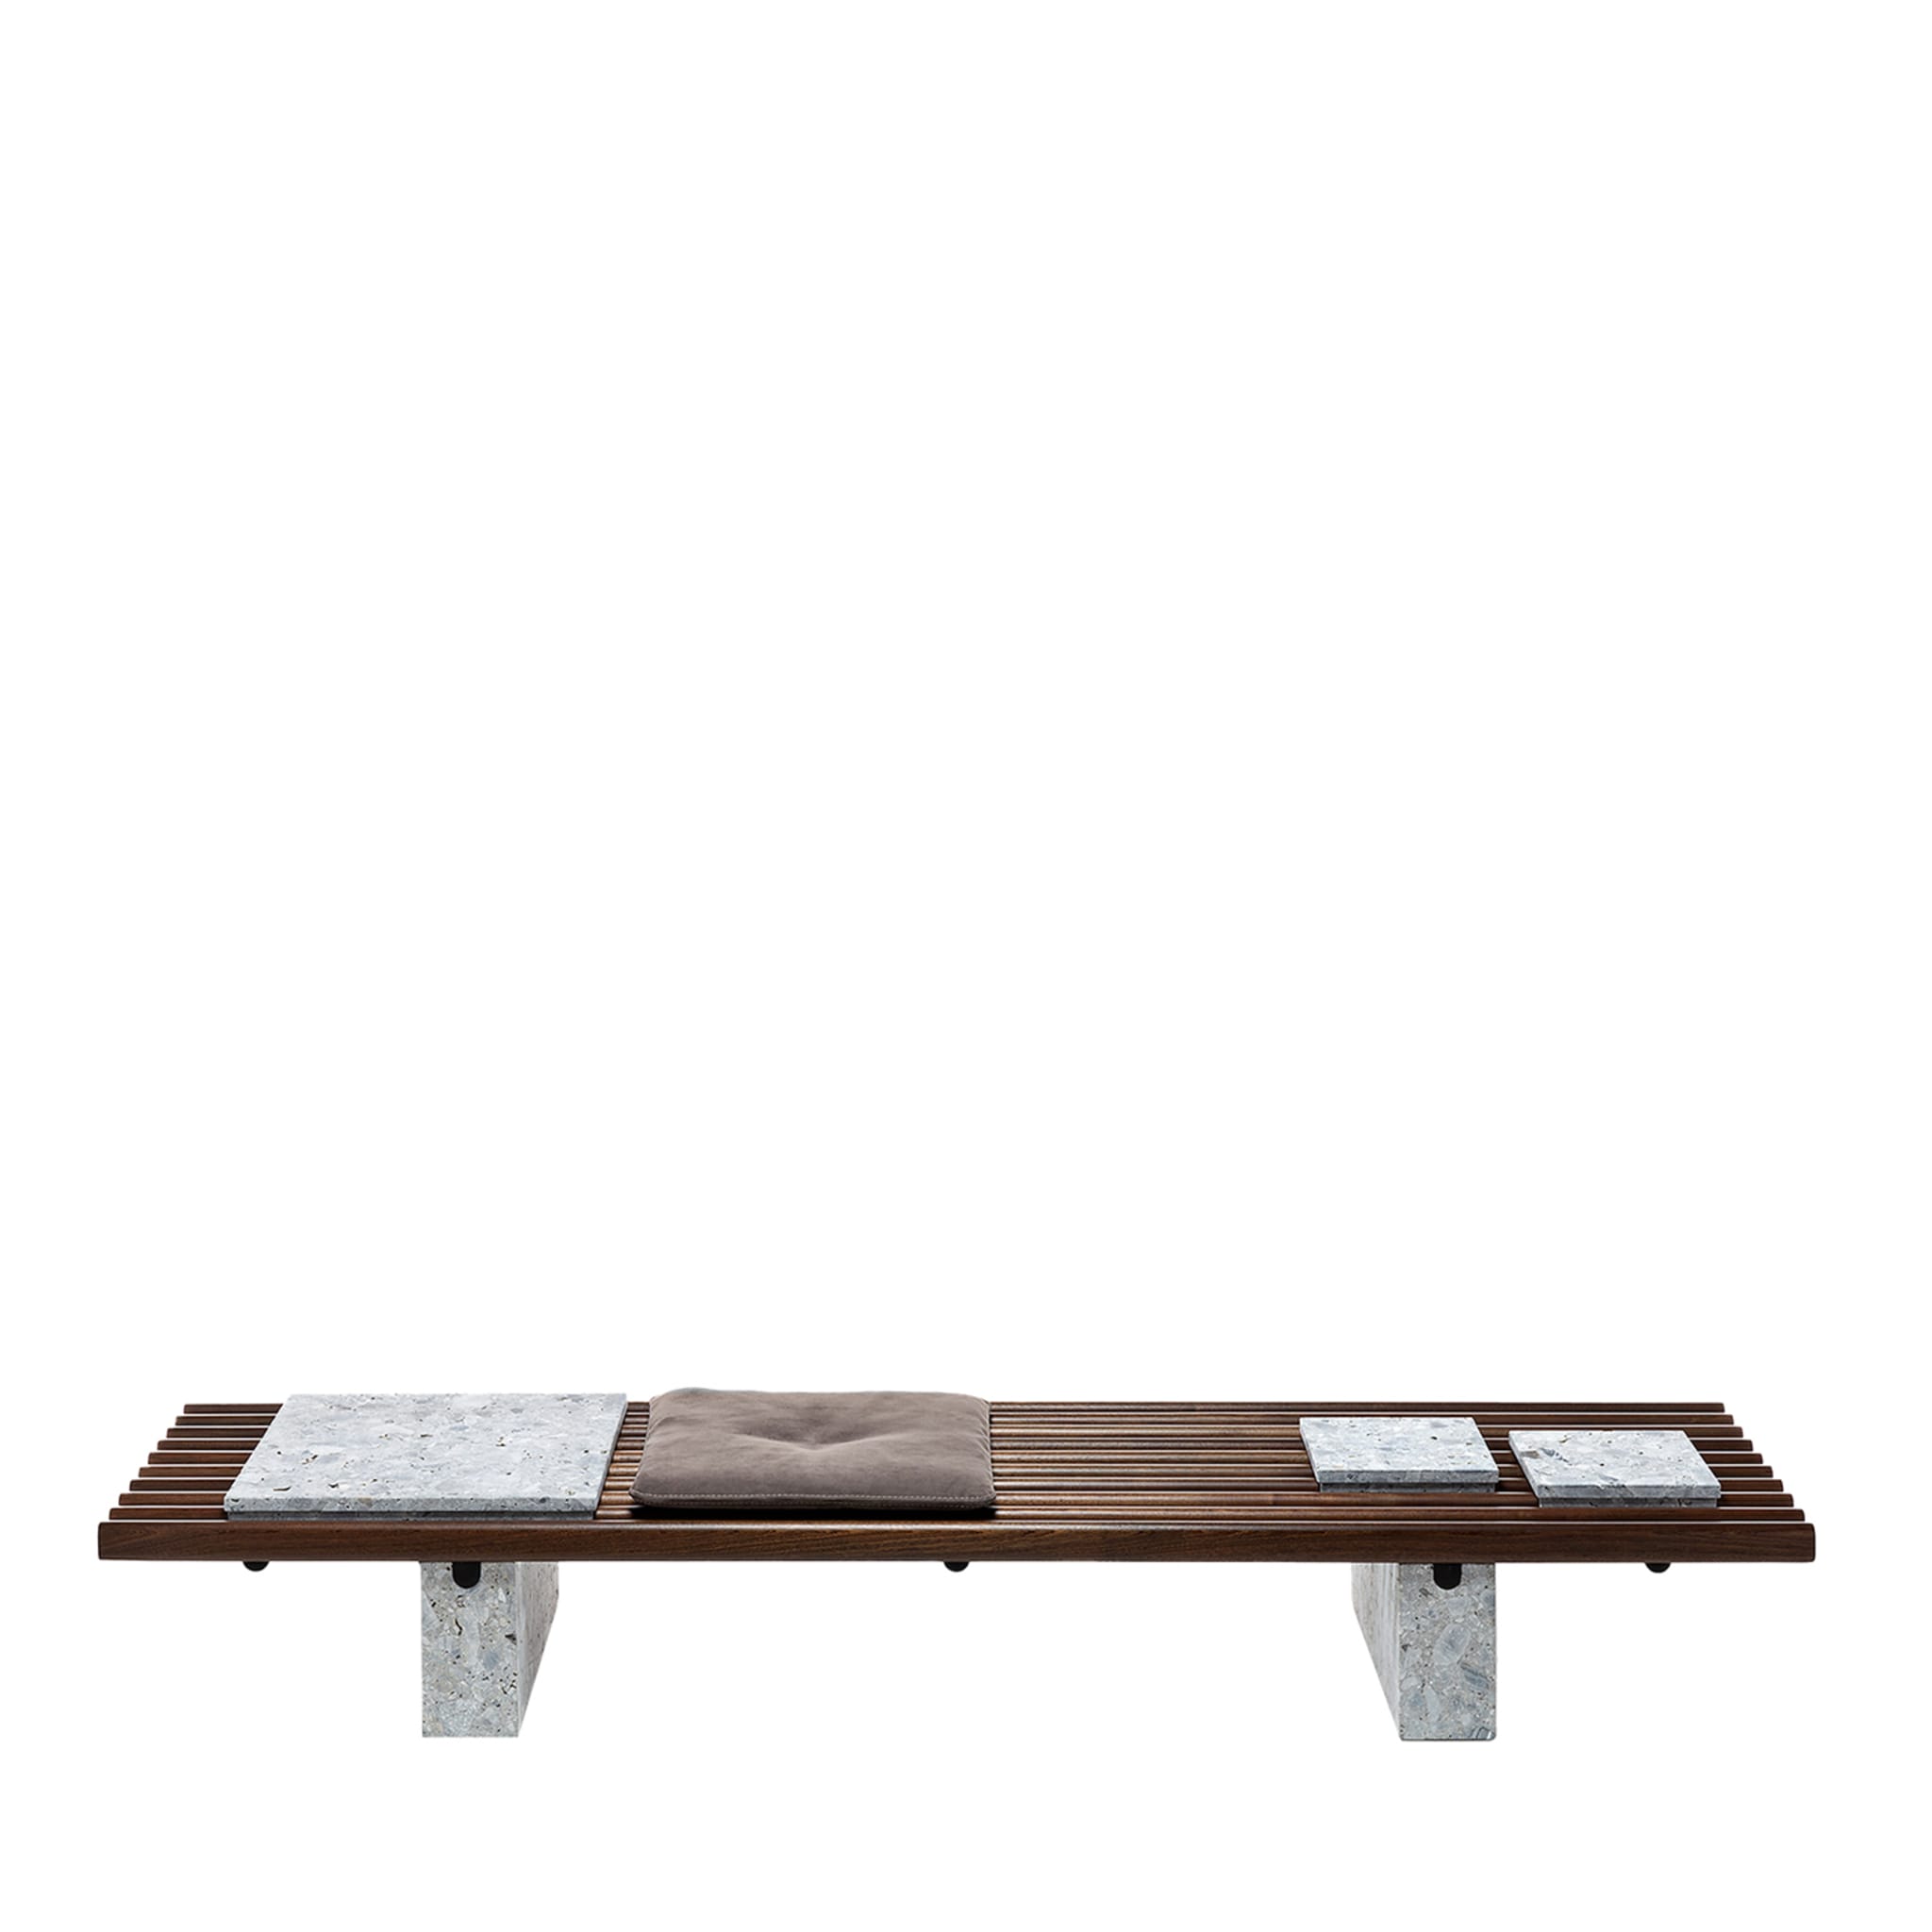 Panarea Coffee Table by Massimo Castagna - Main view